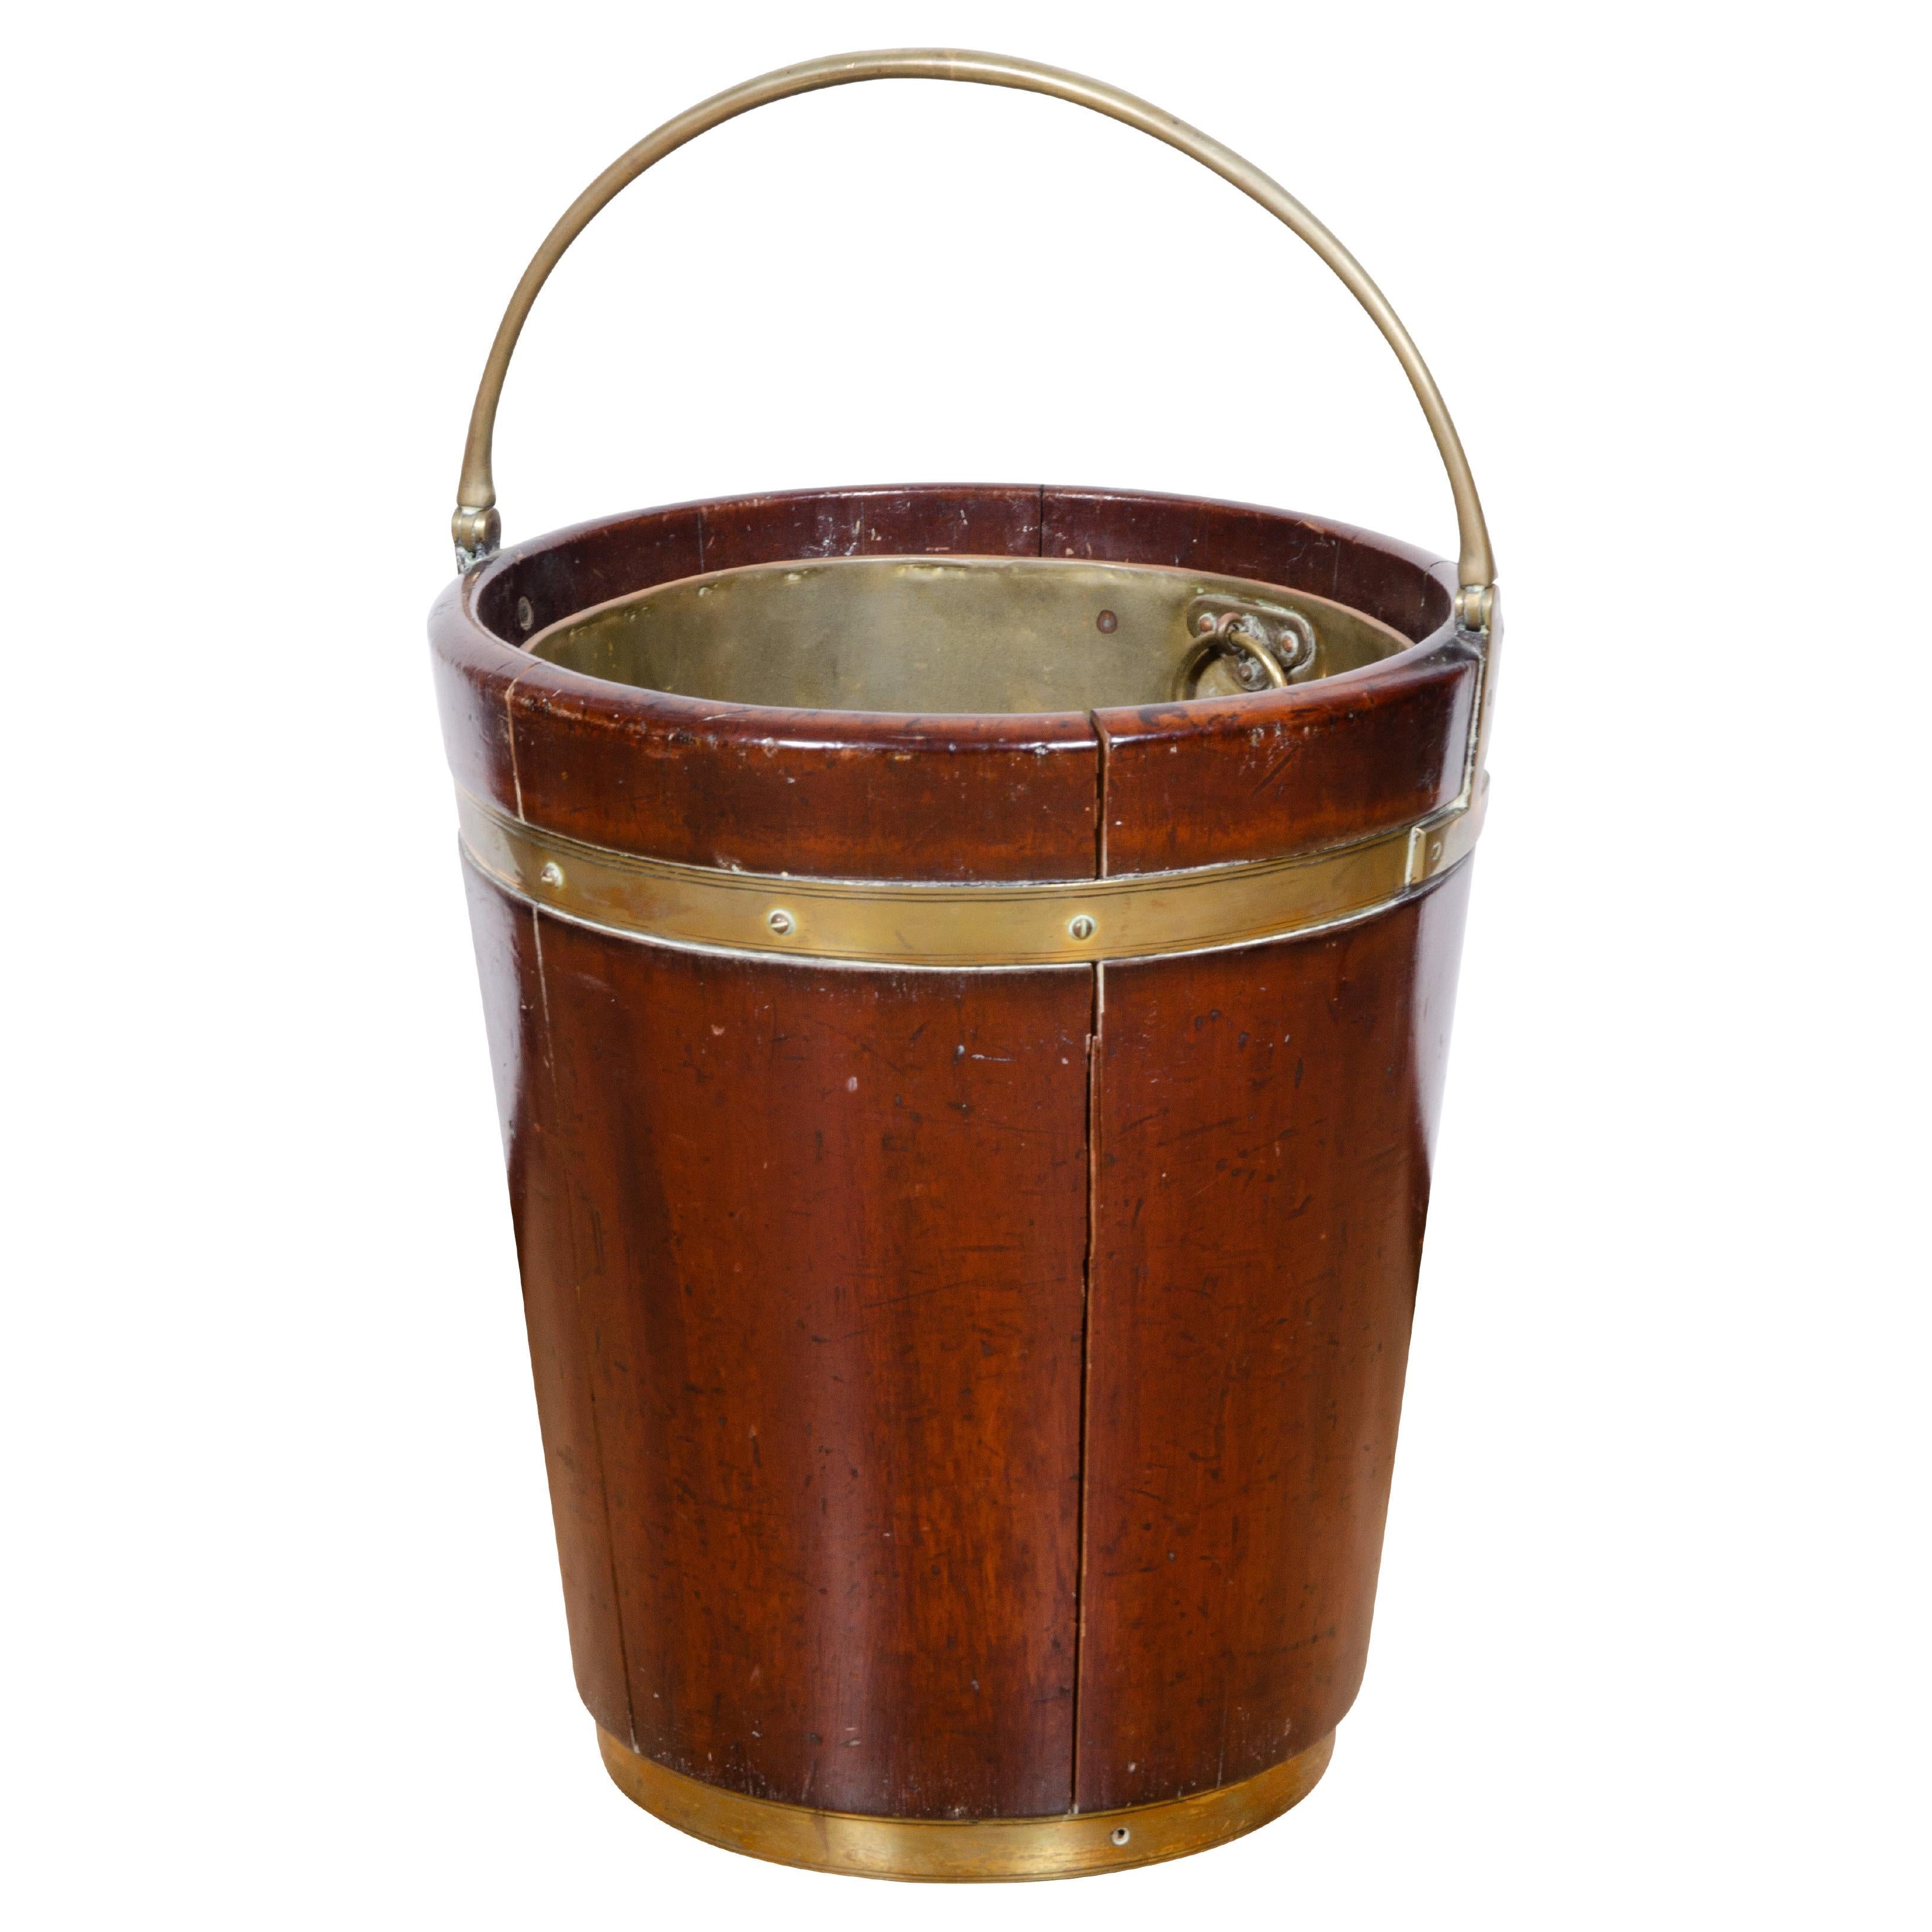 Each with brass bail handle and cylindrical bucket with brass liners and outer strapping. One bucket with notched side to serve a dual purpose as a plate carrier. Lovely on either side of a fireplace. Handle up height 24.75.